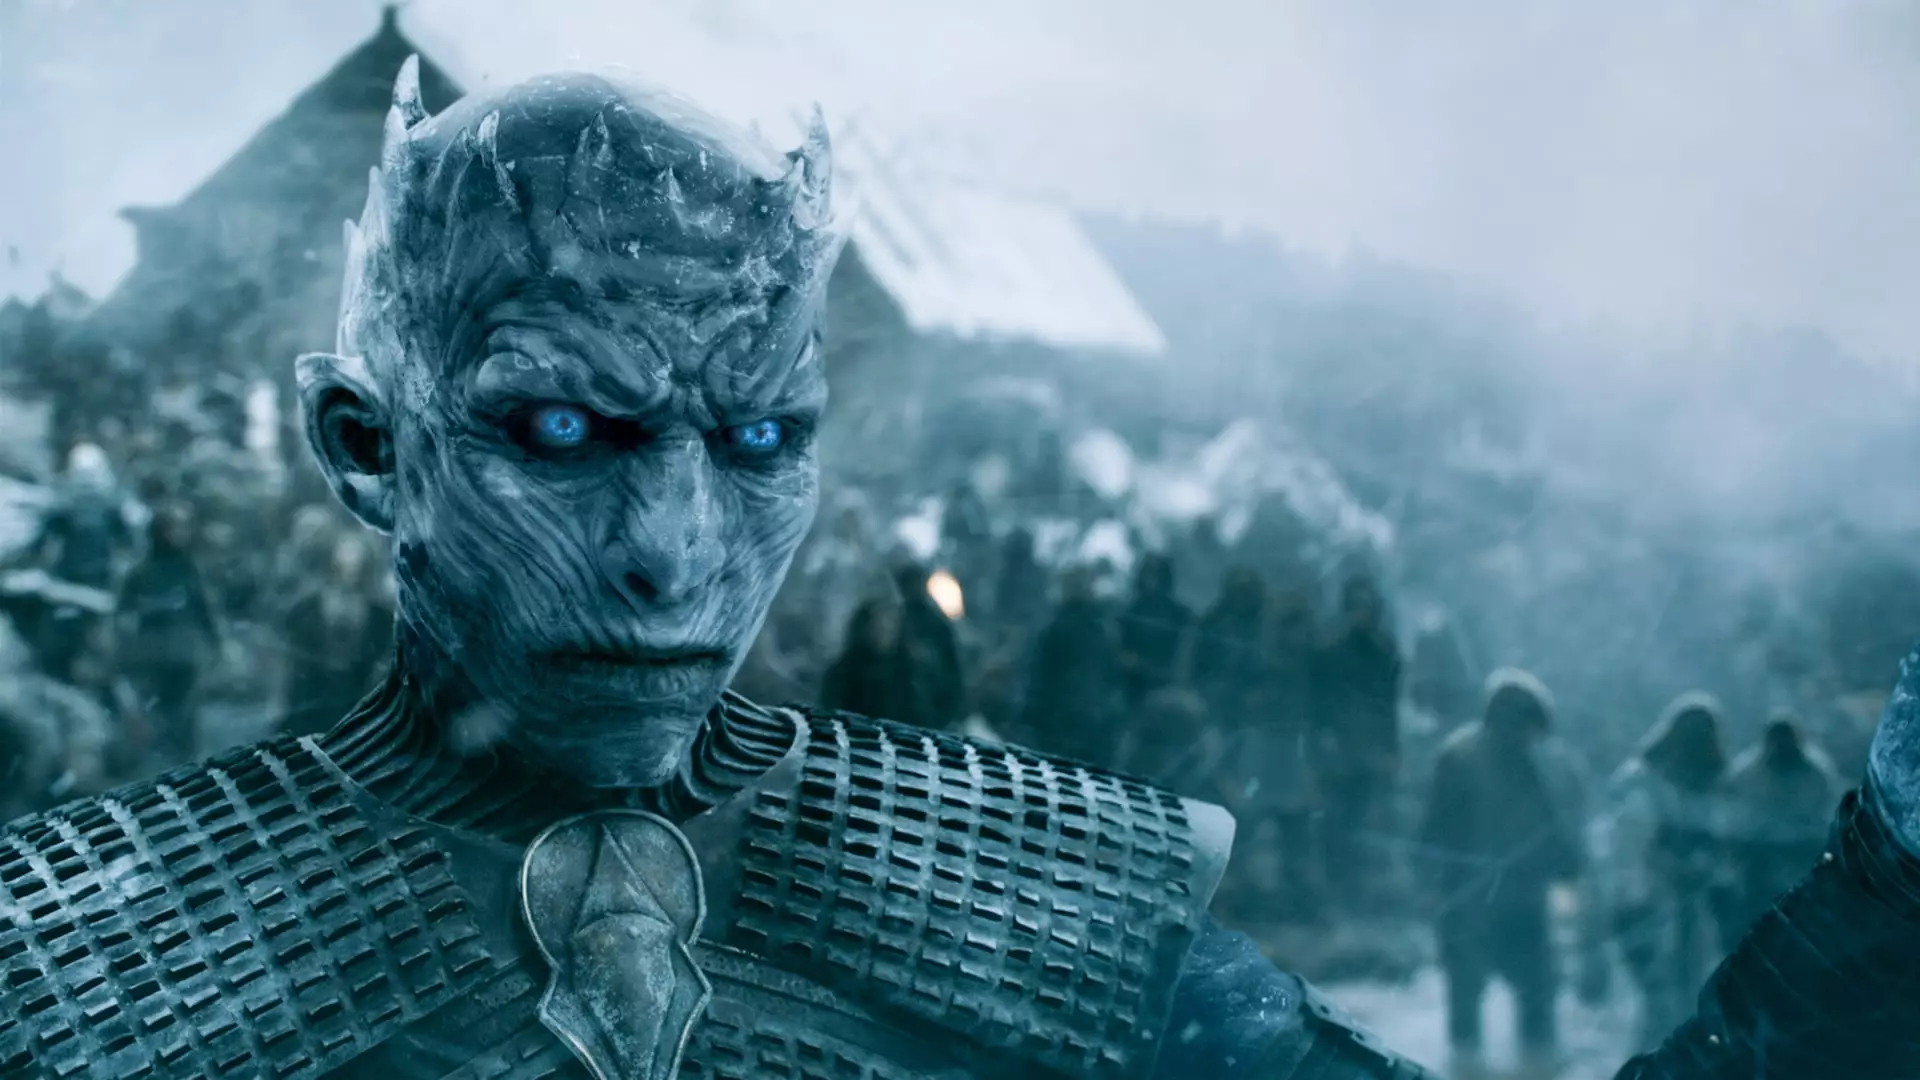 Spot the difference - Richard Brake as the Night King.